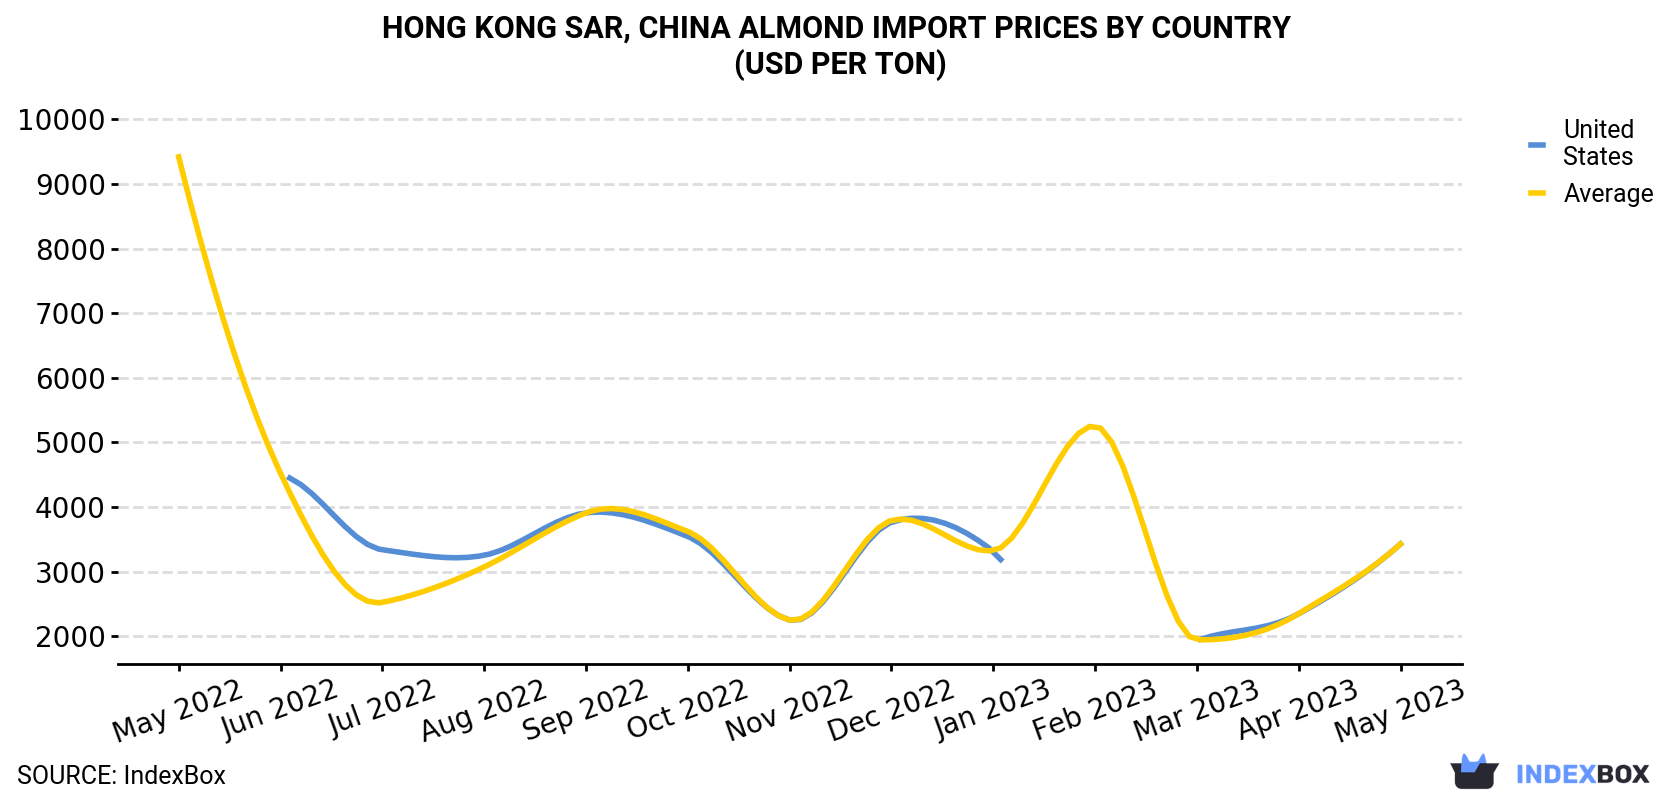 Hong Kong Almond Import Prices By Country (USD Per Ton)